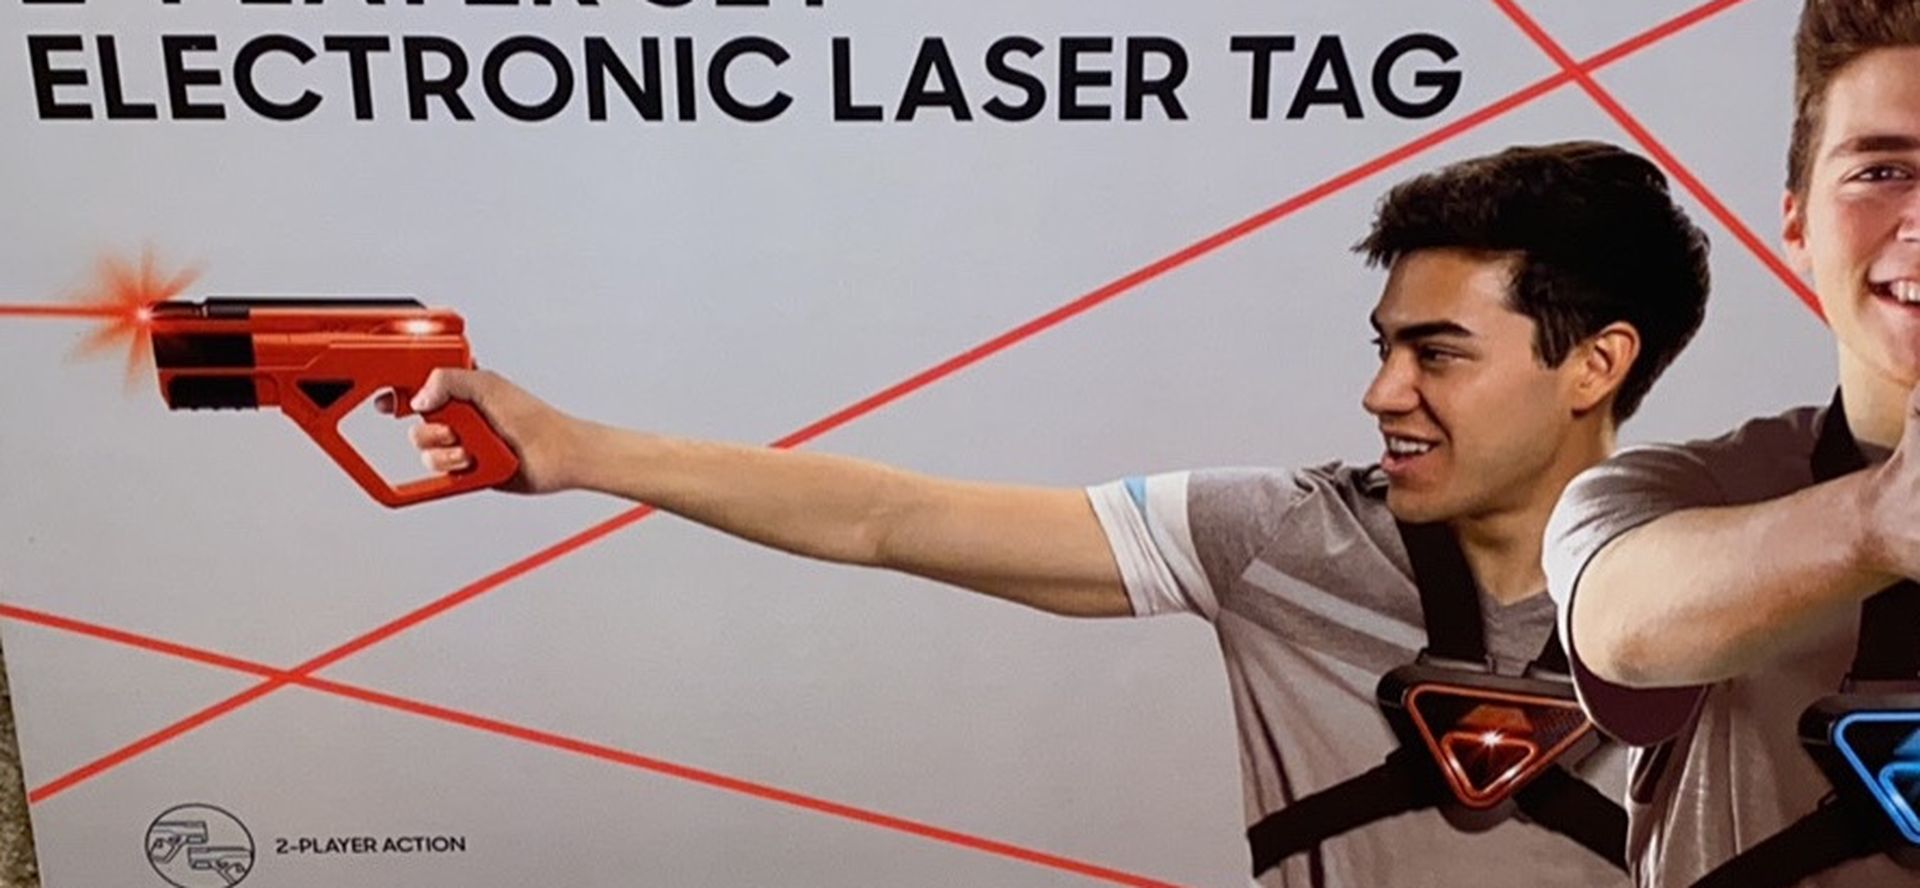 Electronica two player laser tag